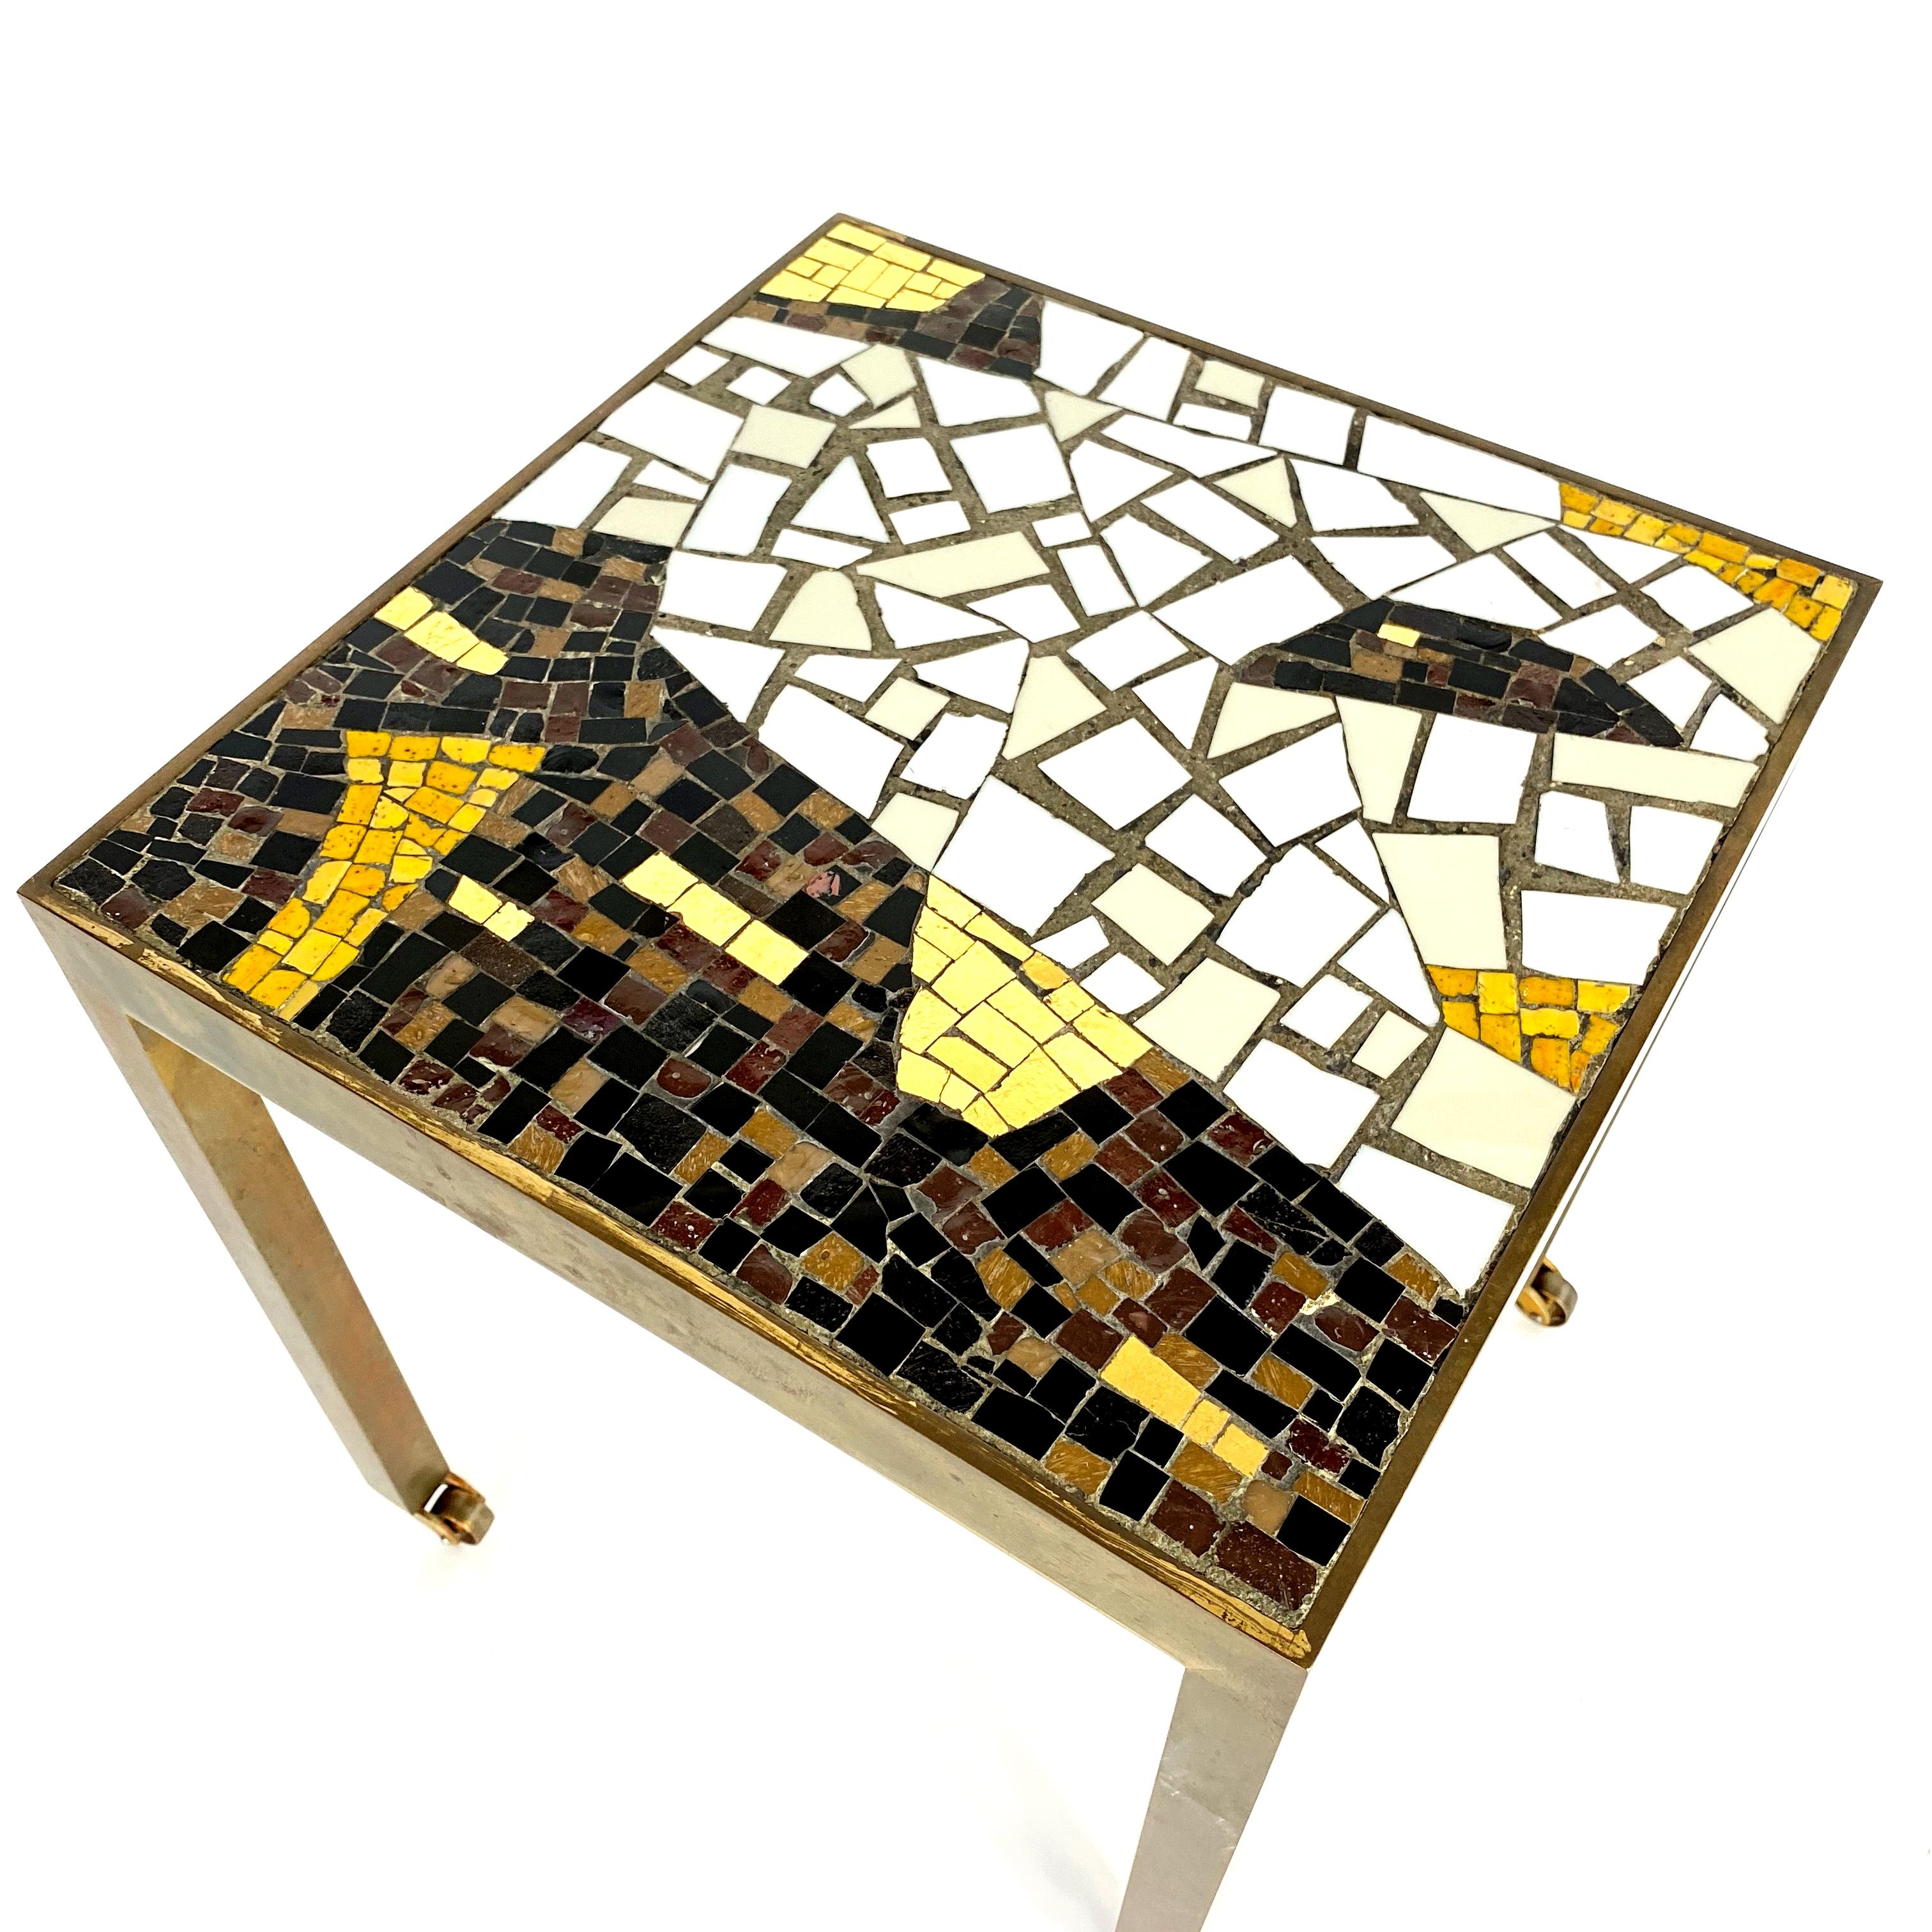 Beautiful and authentic side table, manufactured in Italy in the 1950s. The frame is made of solid brass with Venetian mosaic glass and tile top. The table is in very good condition with nice patina on brass.
   
Measurement:
H 43 x L 39 x D 39